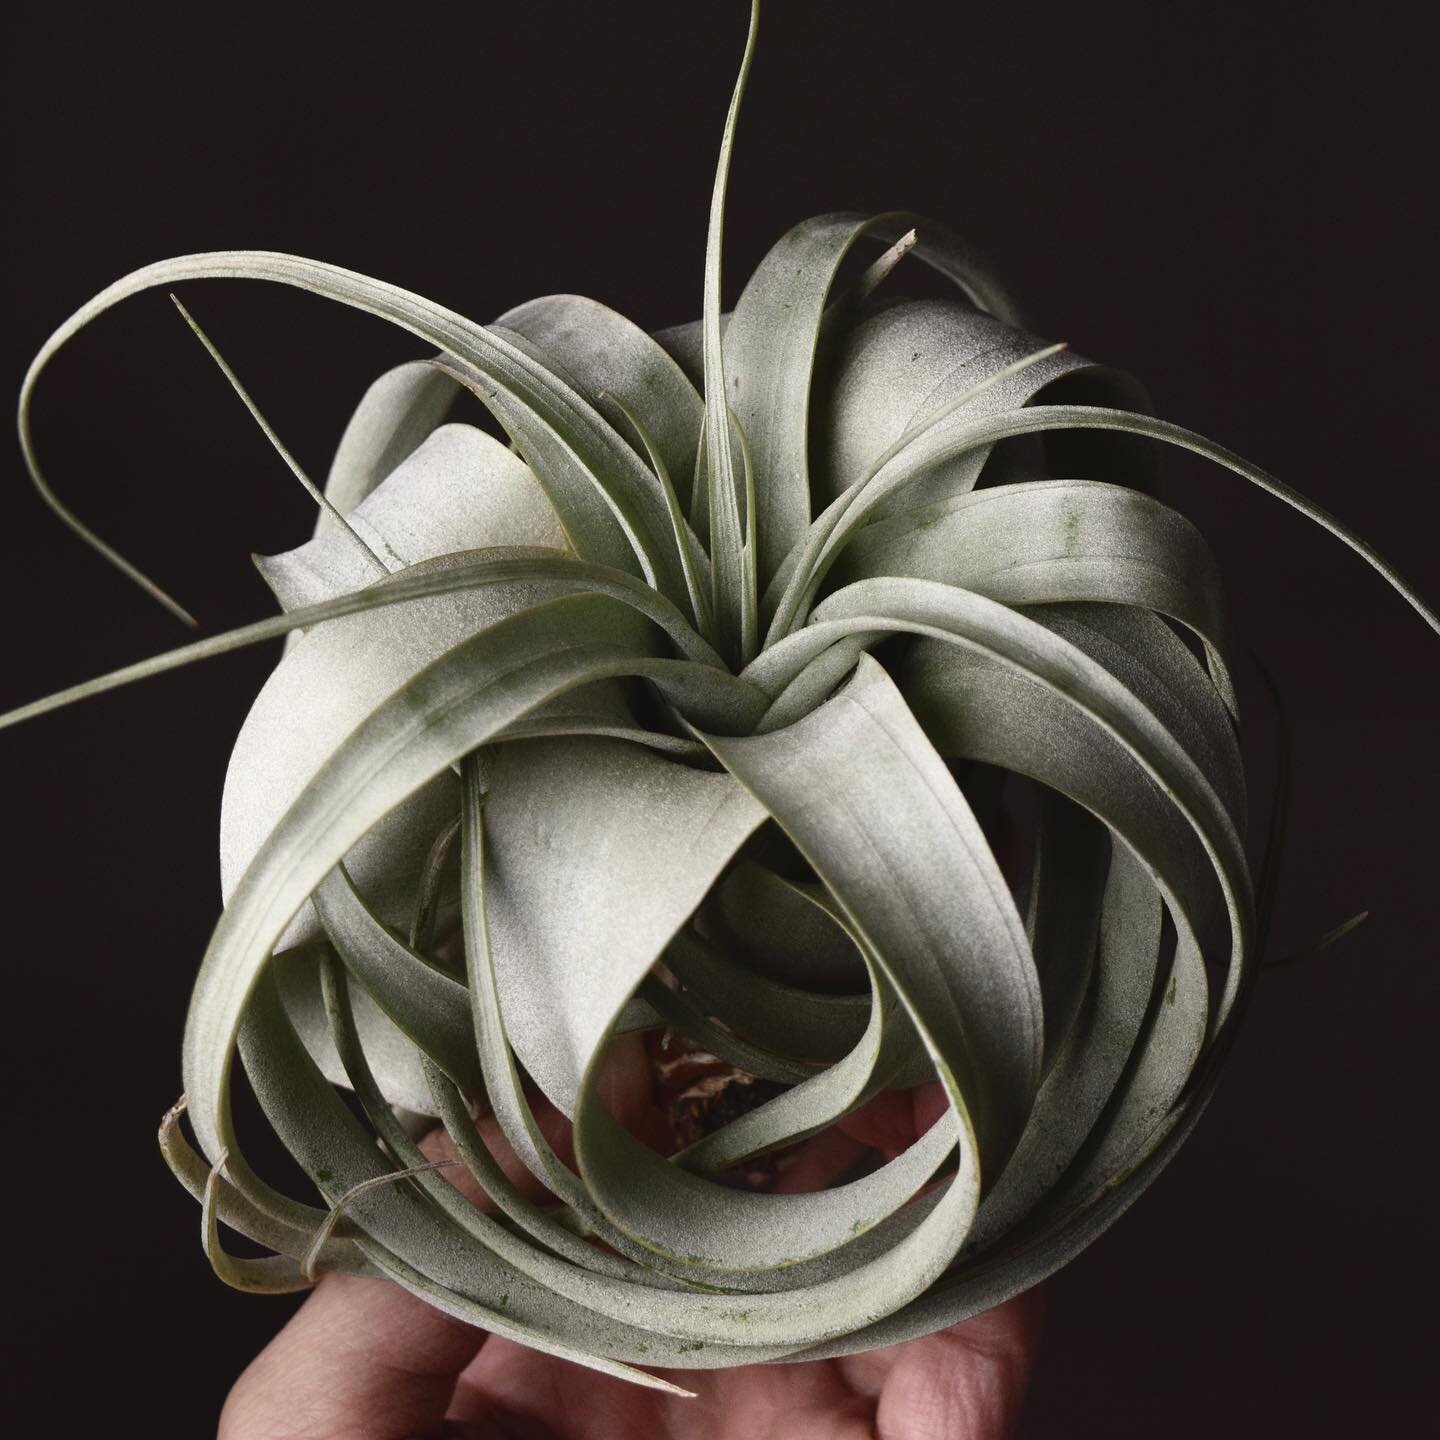 Bonus xerographica + 10% off orders of $75+
.
Use code XERO10. For a limited time.